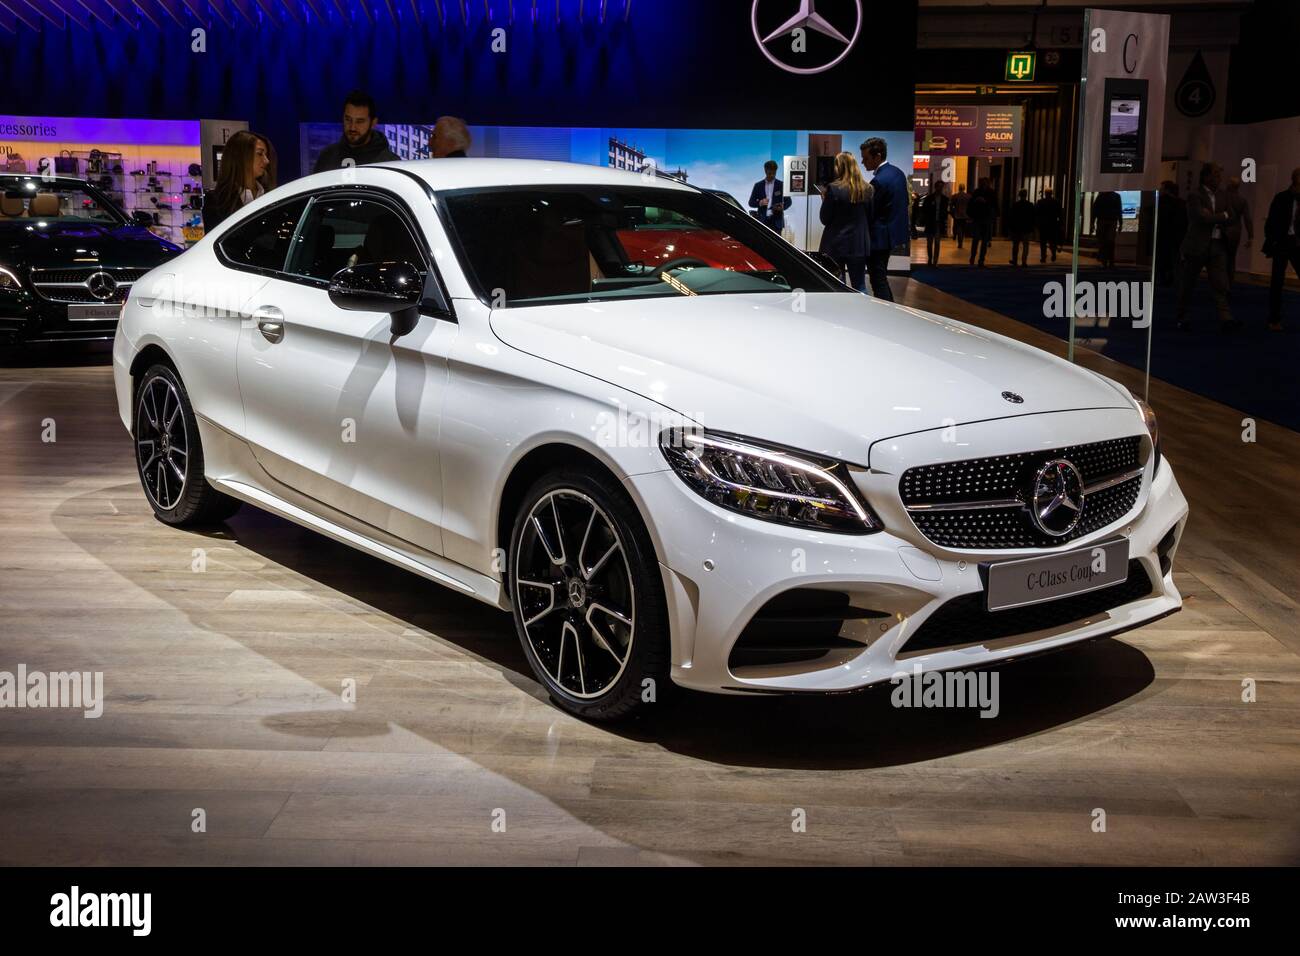 Brussels Jan 9 2020 New Mercedes Benz C Class Coupe Car Model Presented At The Brussels Autosalon 2020 Motor Show Stock Photo Alamy